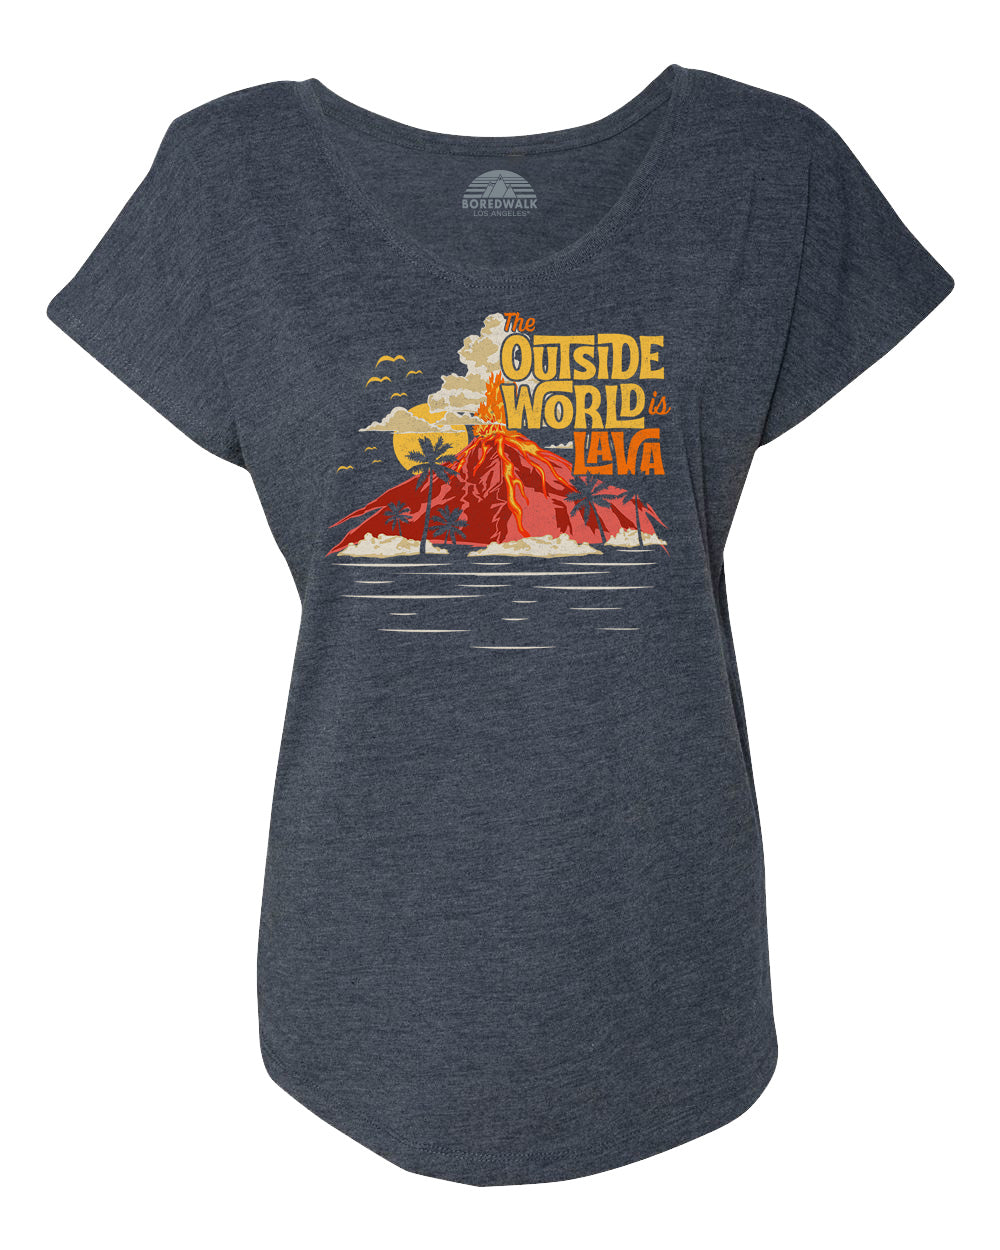 Women's The Outside World is Lava Scoop Neck T-Shirt